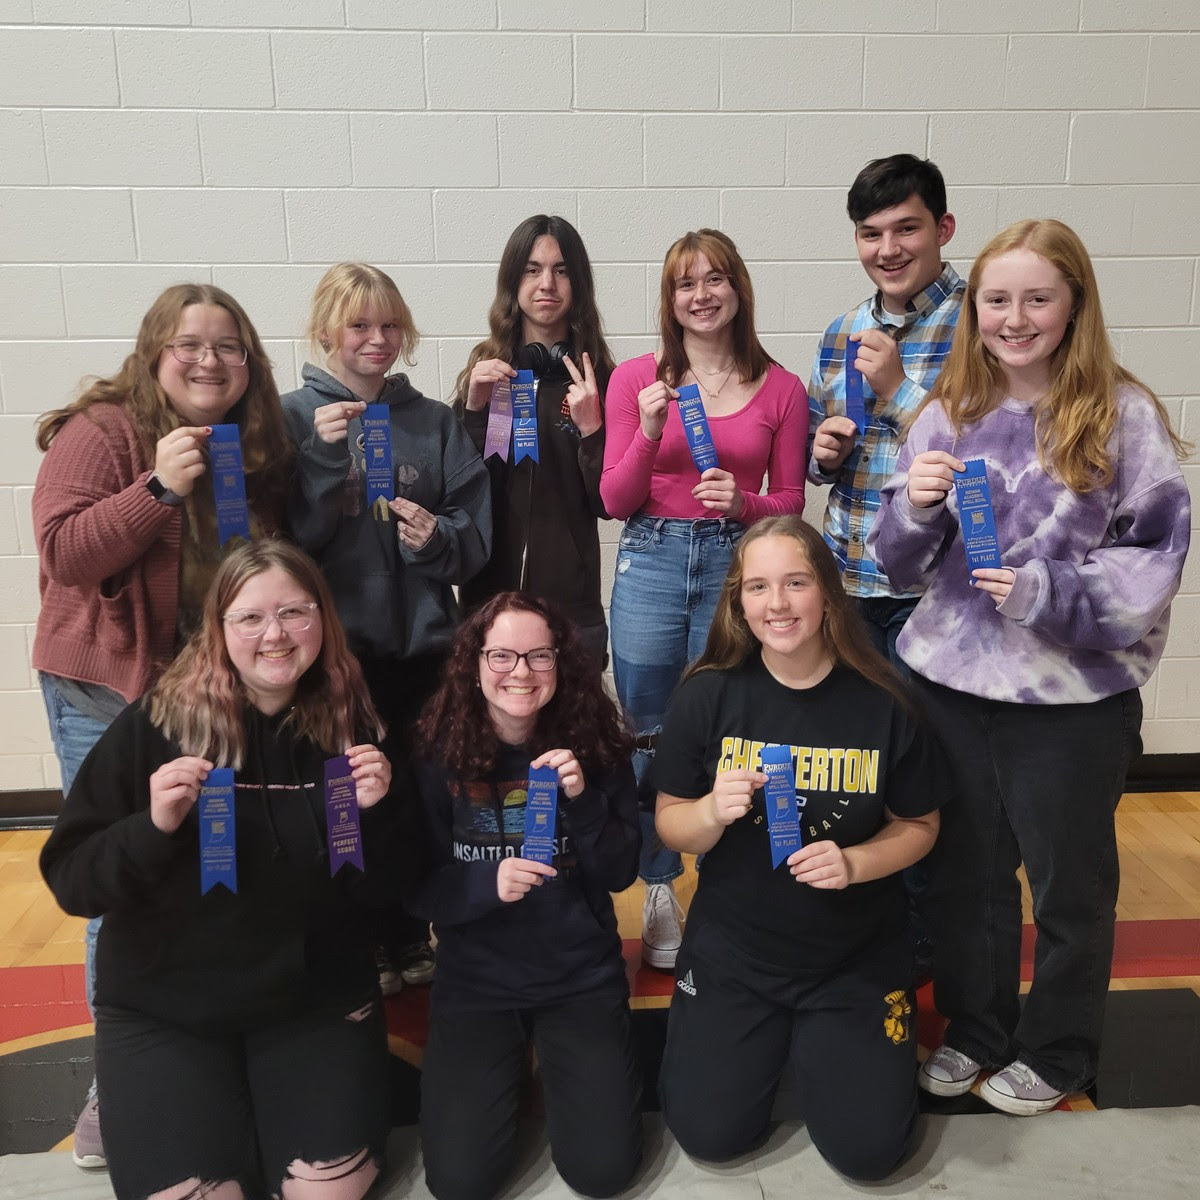 The+2023+Spell+Bowl+team+is+pictured+with+their+first-place+ribbons+from+regionals%21+From+left+to+right%3A+%28Back+row%3A+Giszelle+Pfeiffer%2C+Ava+Madigan%2C+Jackson+Bender%2C+Marlee+Wilson%2C+Logan+Arthur%2C+Bailey+Pikula%29.+Front+row%3A+%28Carson+Foster%2C+Rebecca+Adcock%2C+Jocelyn+Ringler%29.+%0A